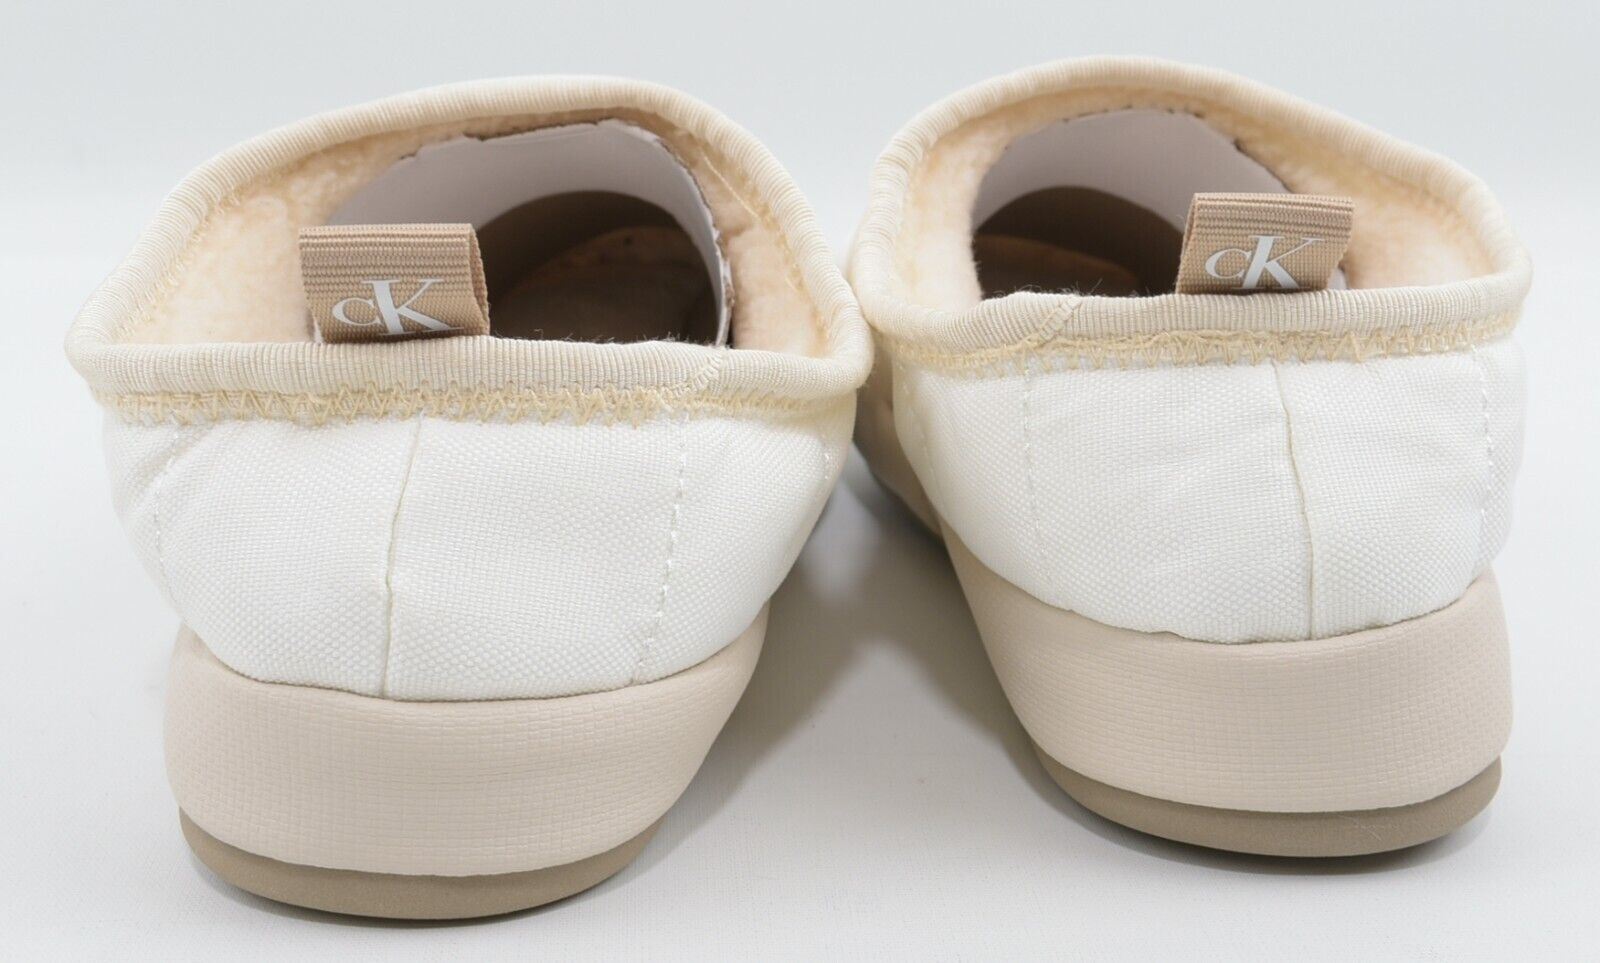 CALVIN KLEIN JEANS Womens Slippers with Warm Lining, Cream, size UK 4 / EU 37